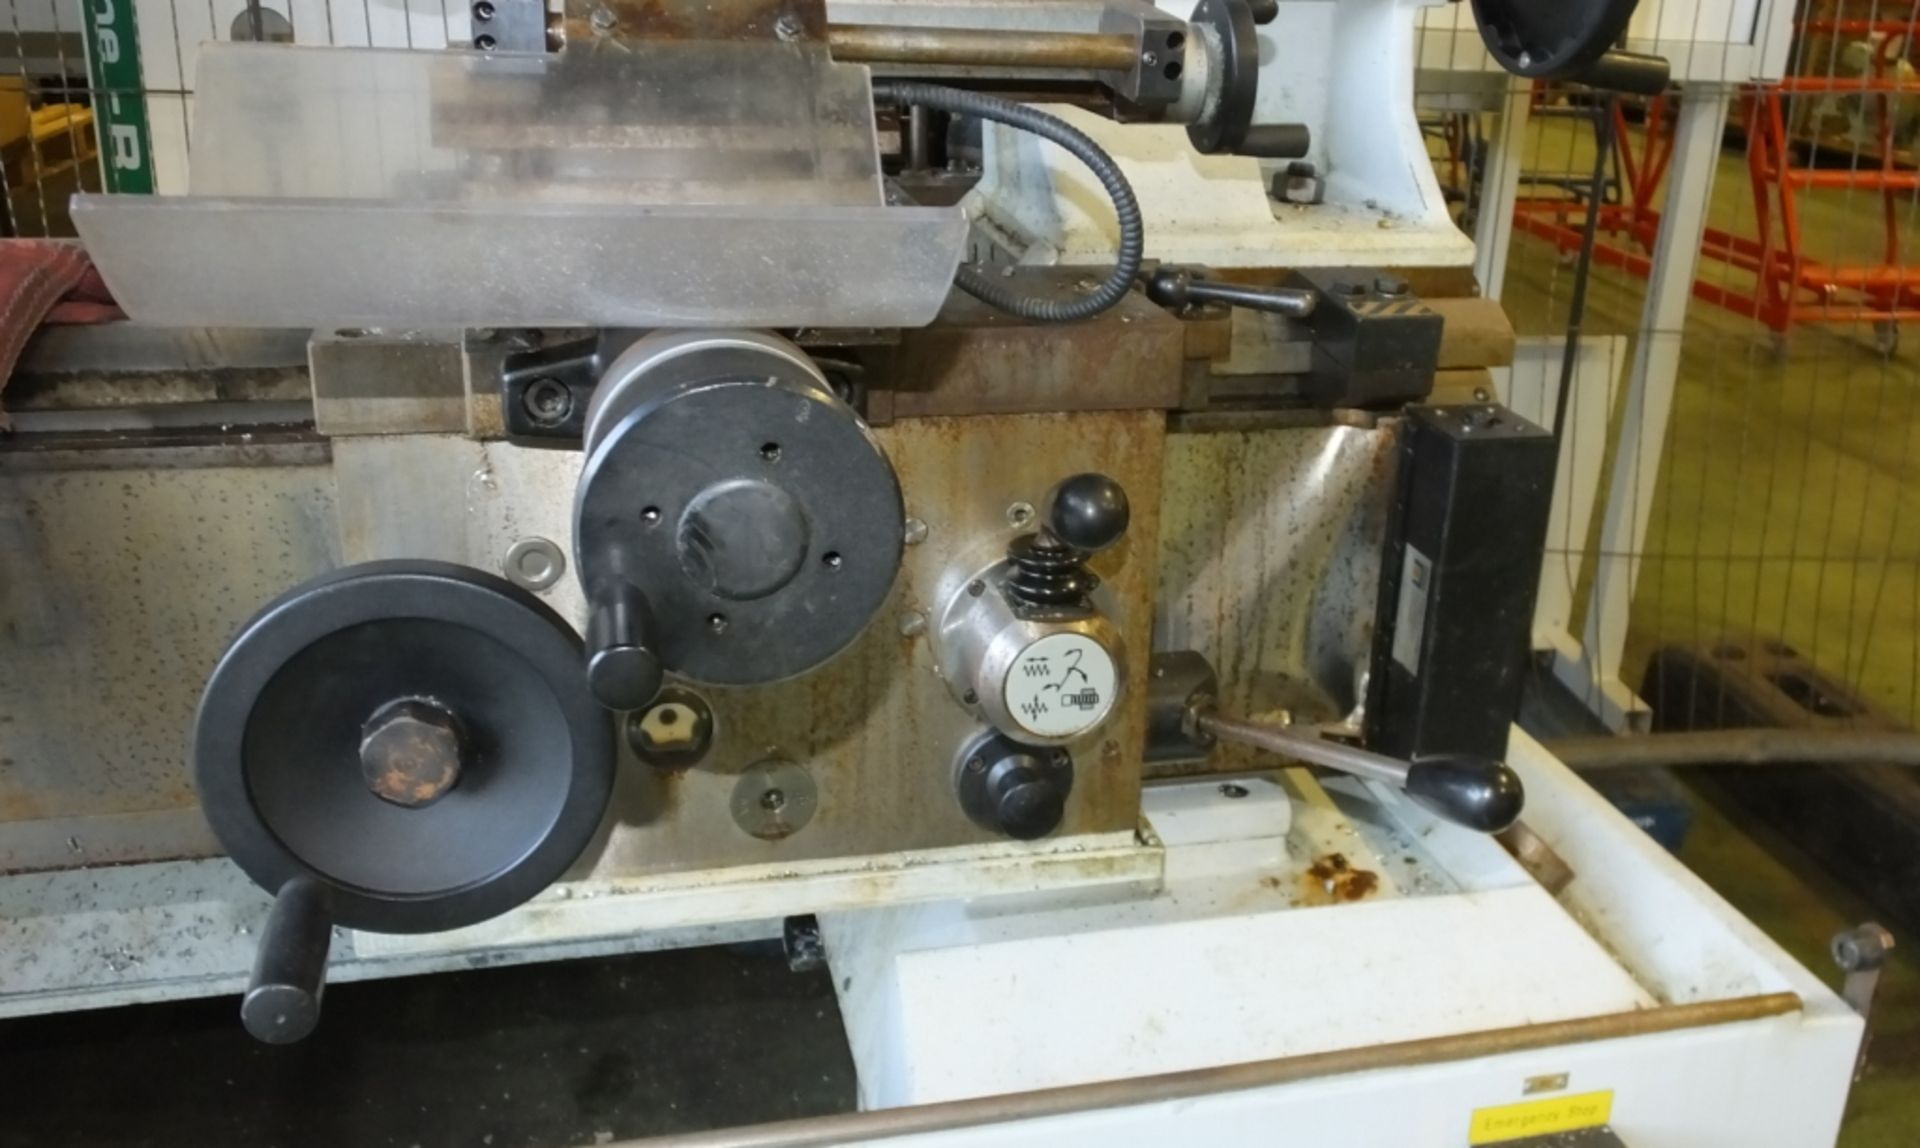 Weiler Commodor 230 Lathe - 3 Jaw Chuck - Model 230 AC - Serial 0001 - 400V - 22.8A - YOM - Image 8 of 11